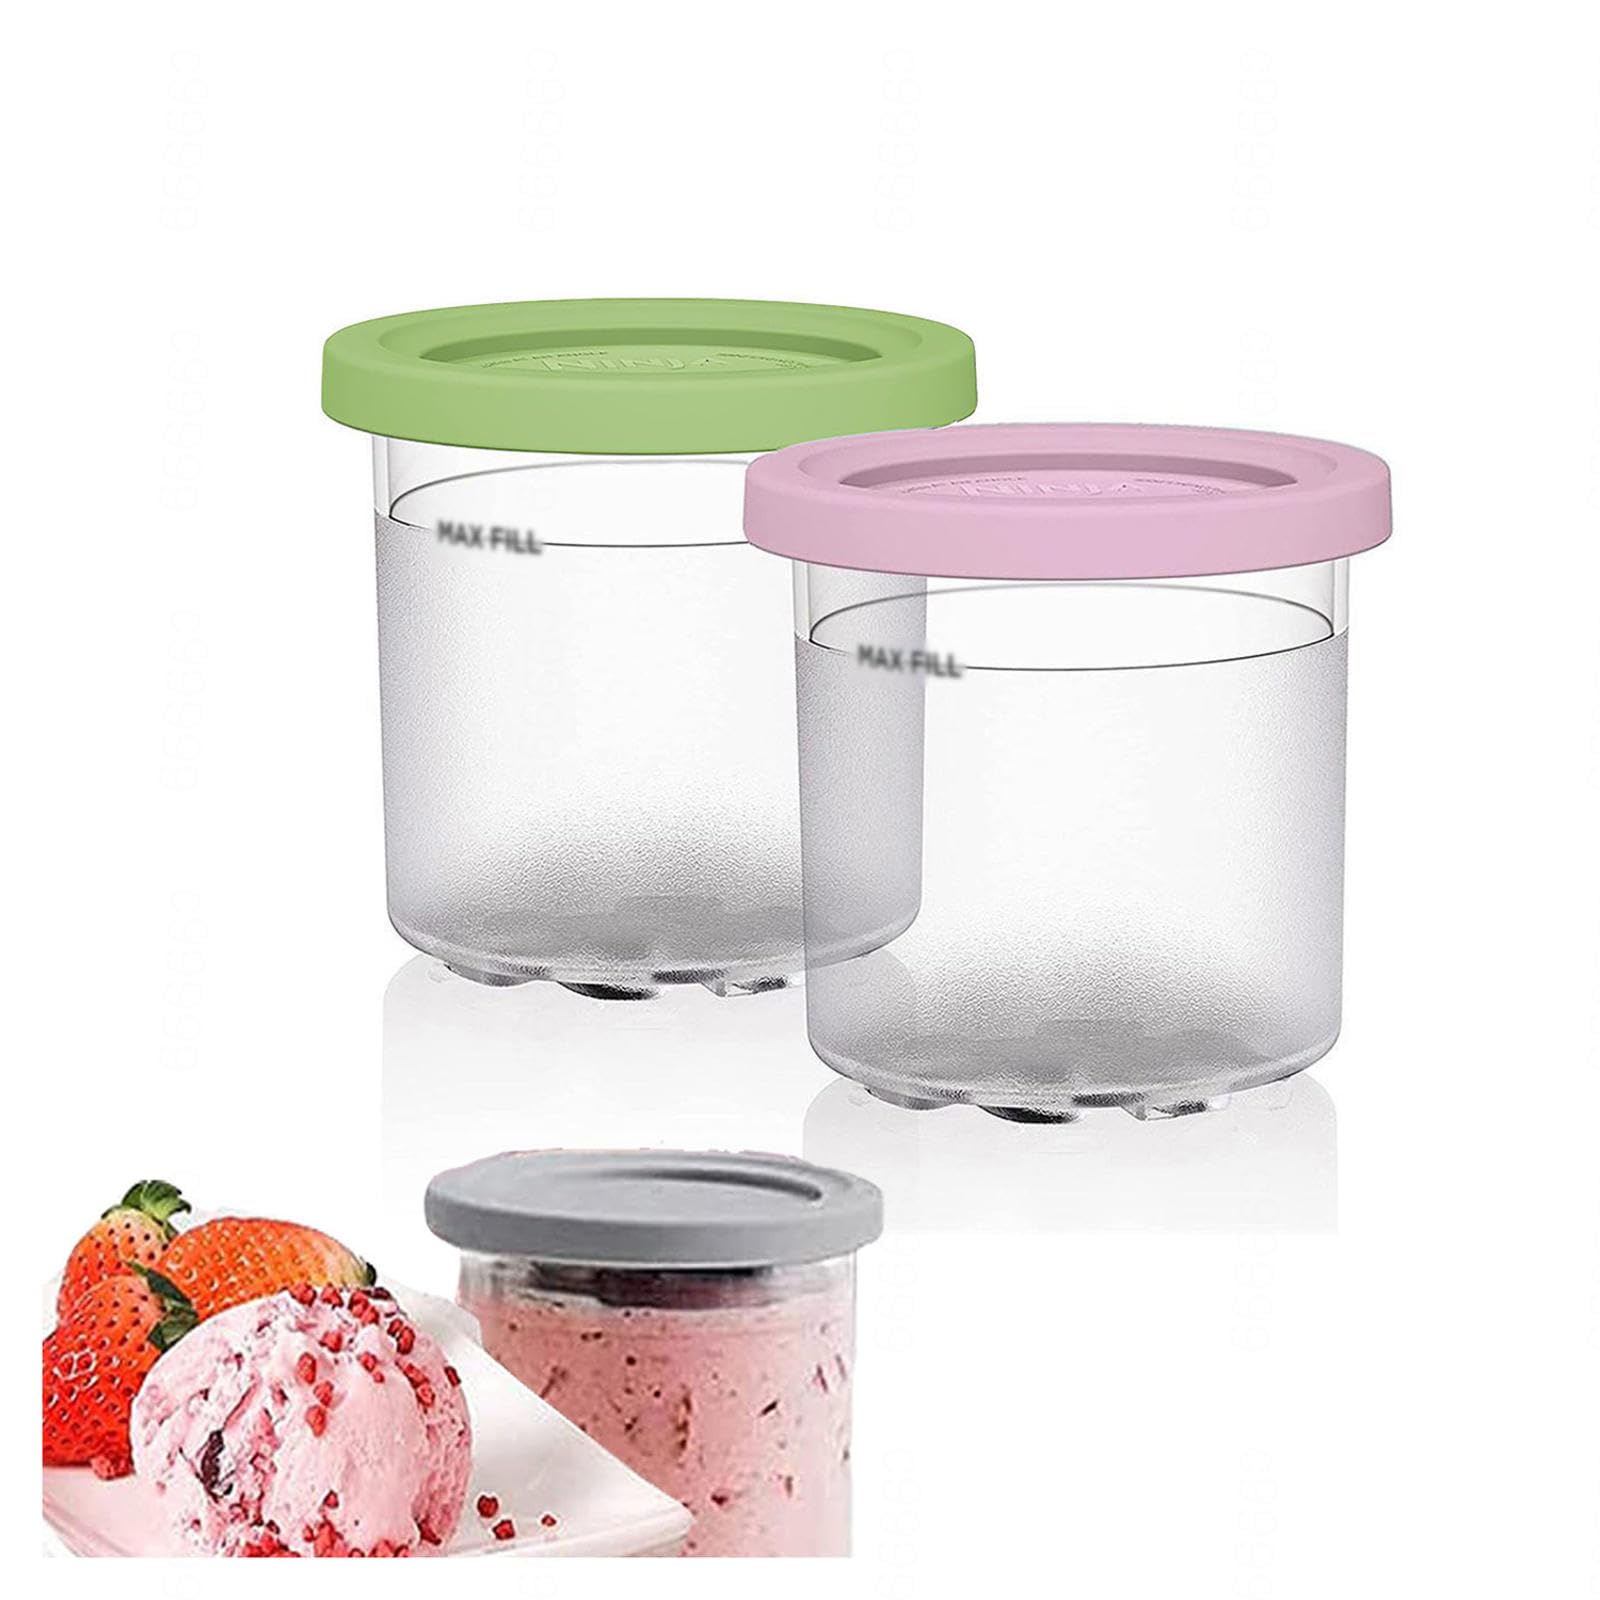 EVANEM 2/4/6PCS Creami Deluxe Pints, for Creami Ninja Ice Cream Deluxe,16 OZ Creami Pint Containers Bpa-Free,Dishwasher Safe Compatible NC301 NC300 NC299AMZ Series Ice Cream Maker,Pink+Green-4PCS